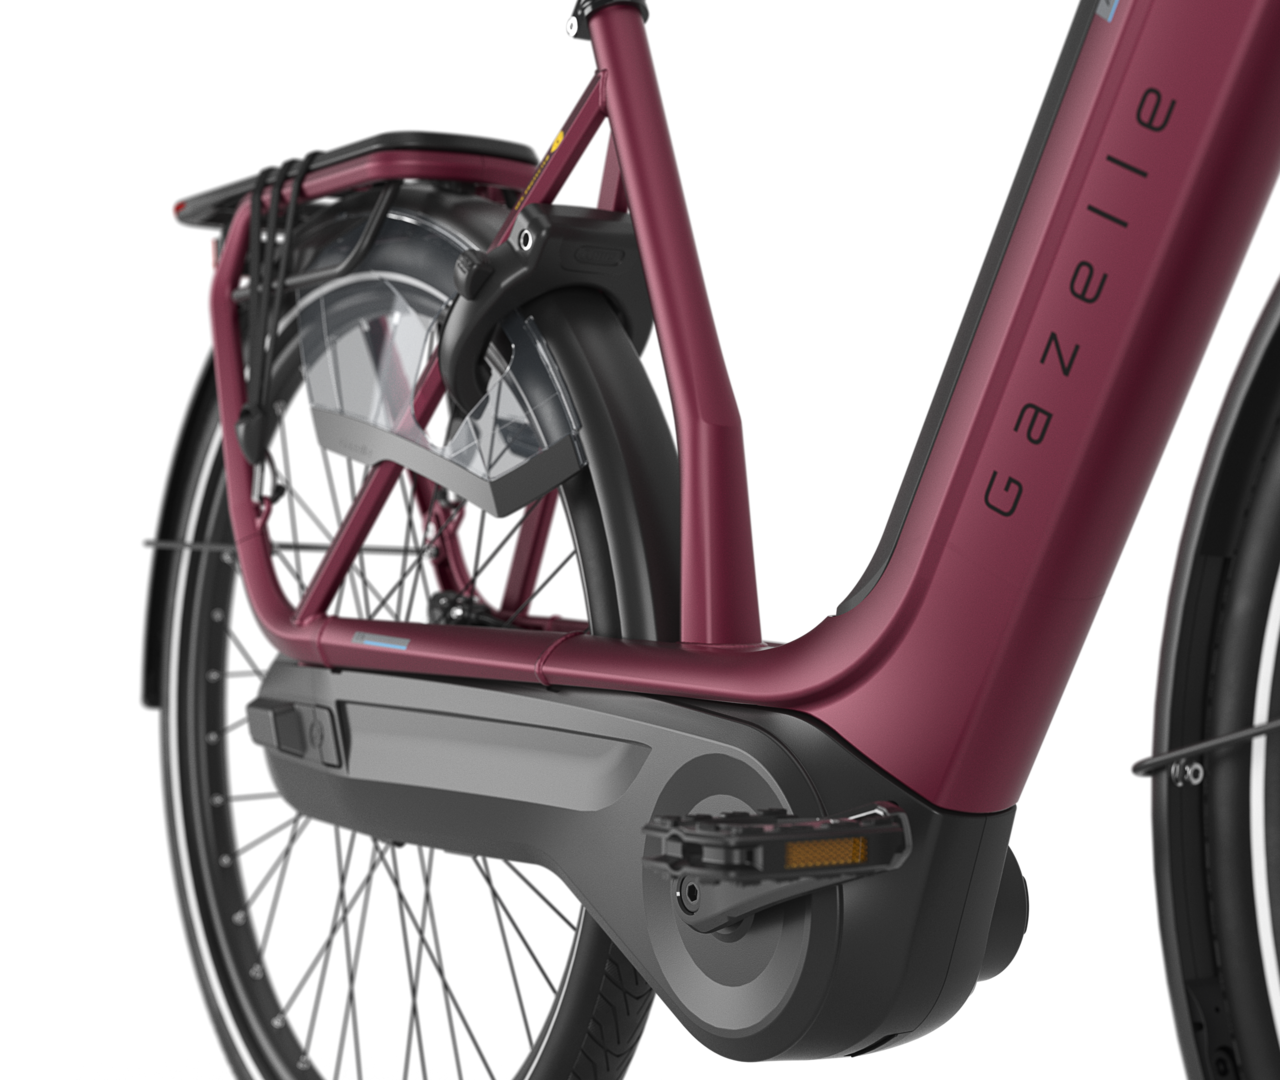 Stable frame with low, wide step-through Gazelle Avignon C8 HMB E-bike low-step coral red